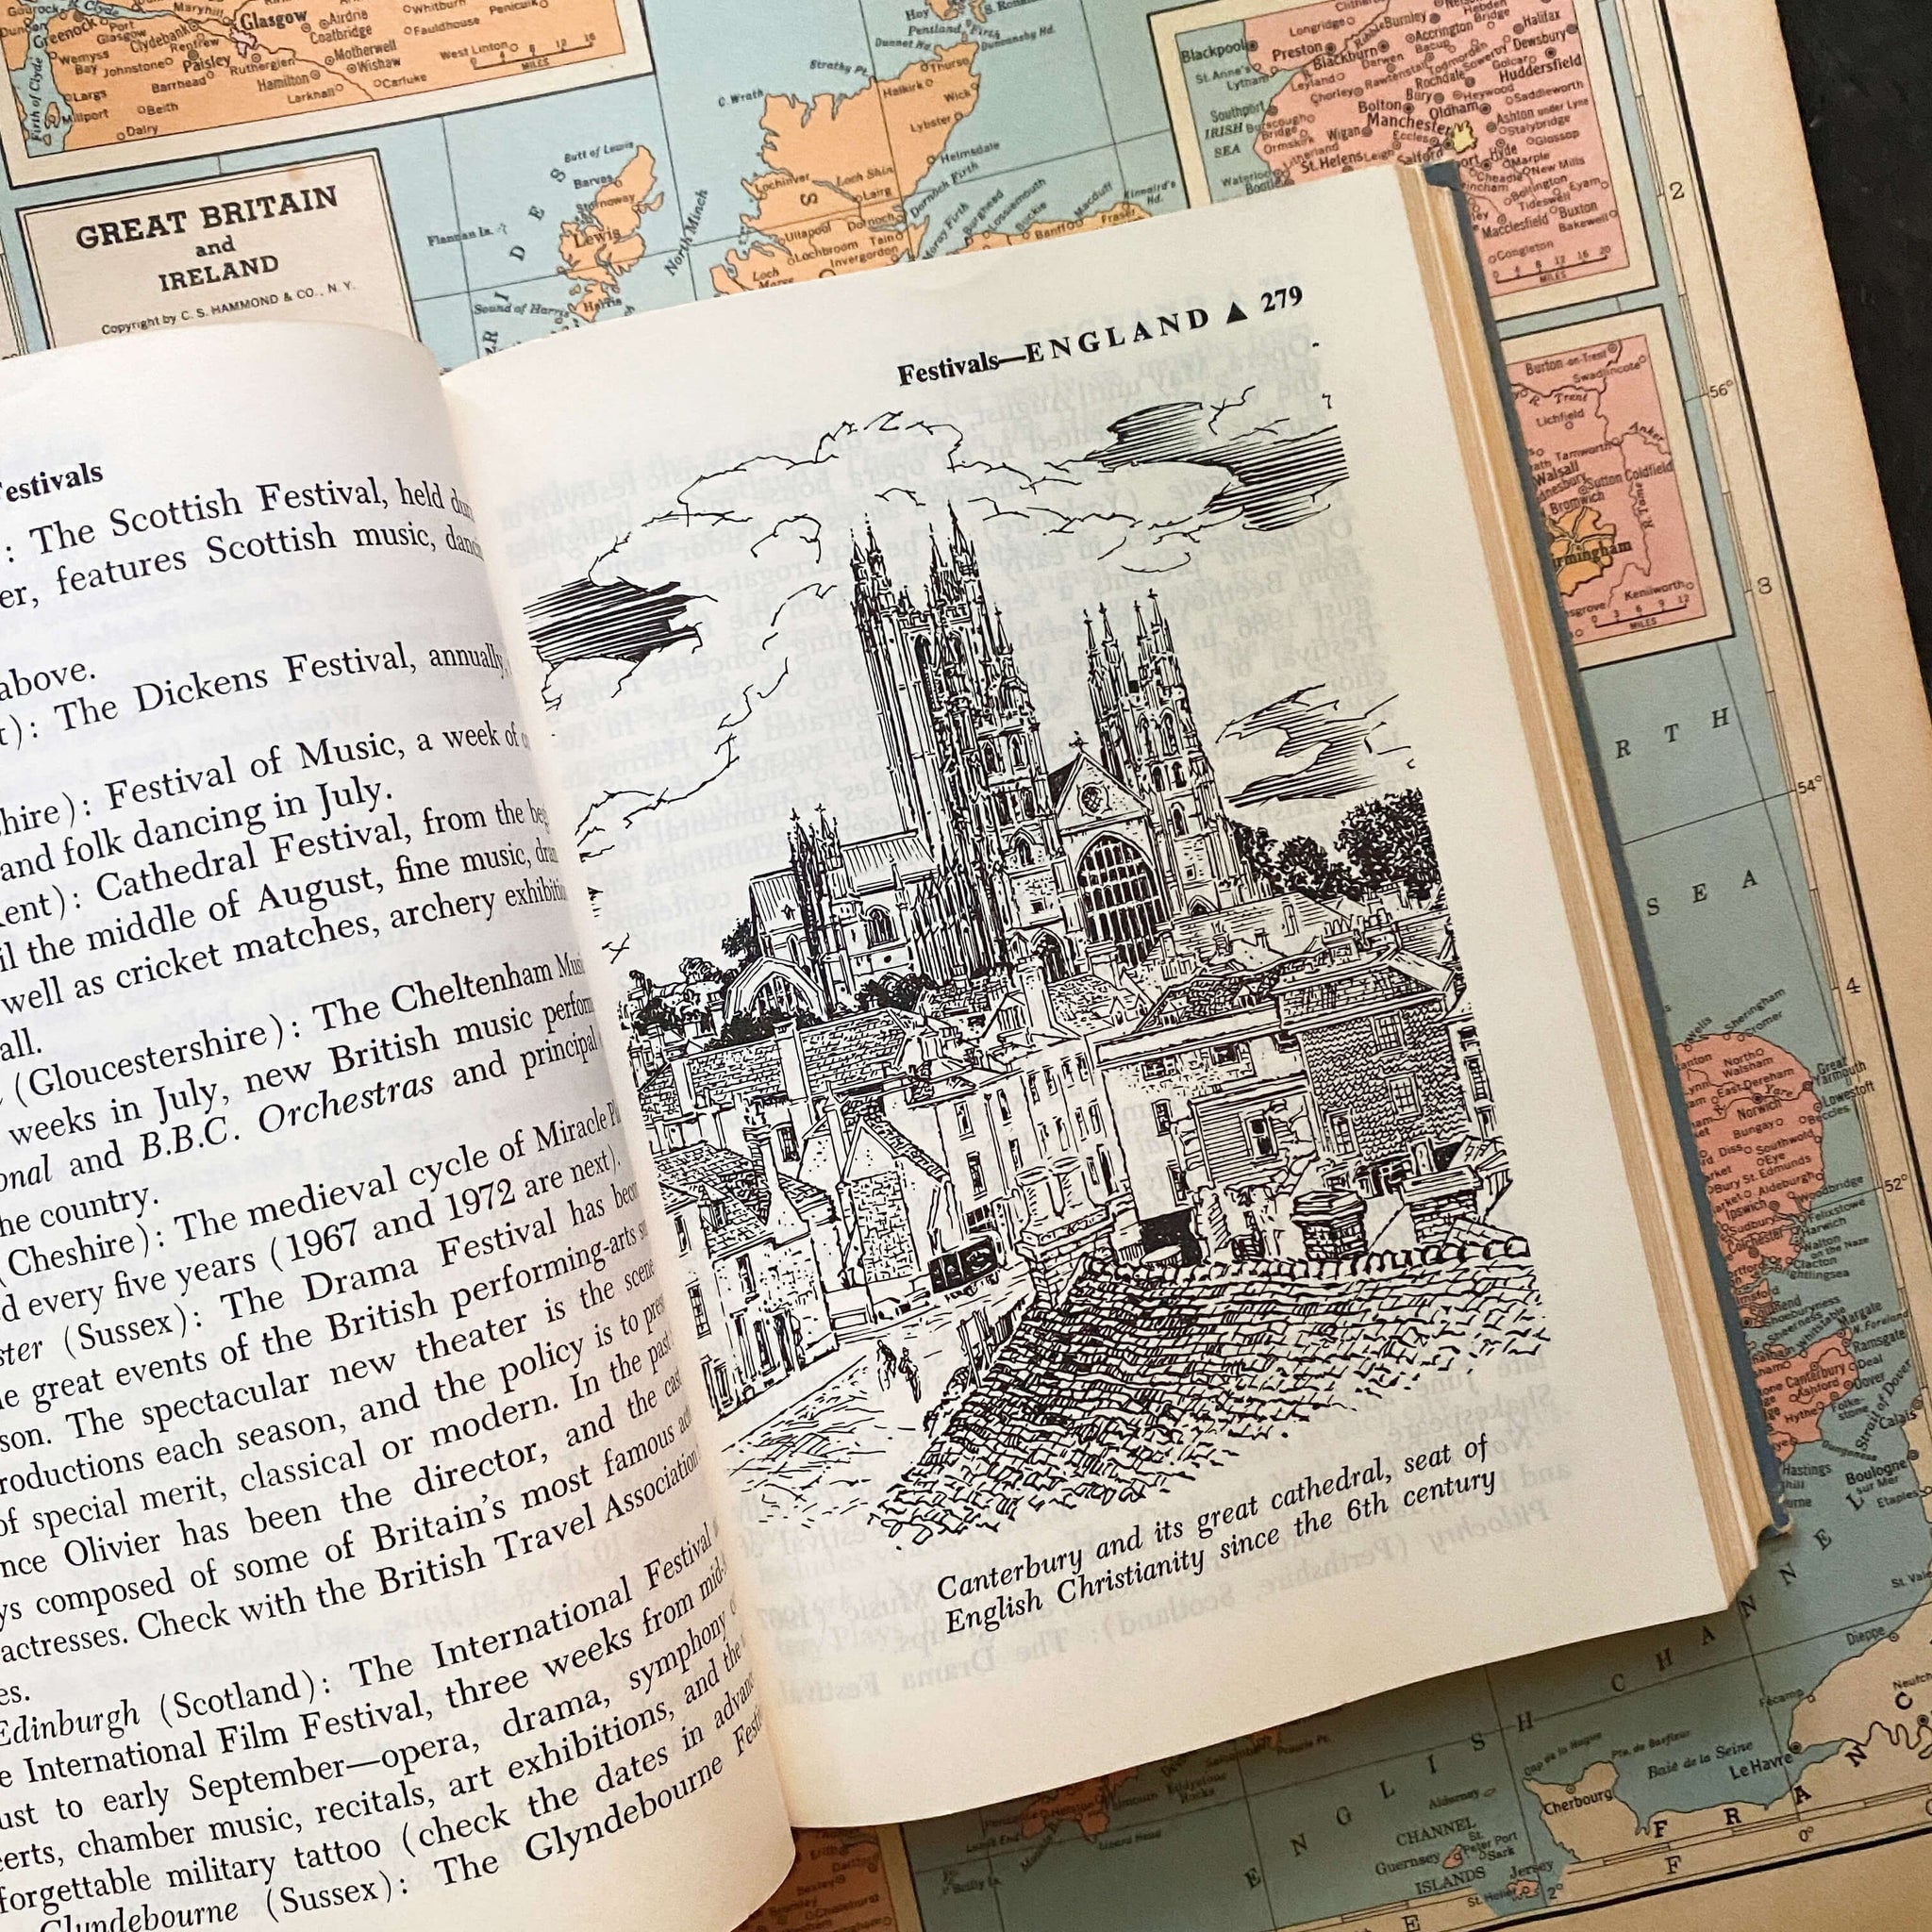 Olson's Complete Motoring Guide to The British Isles circa 1967